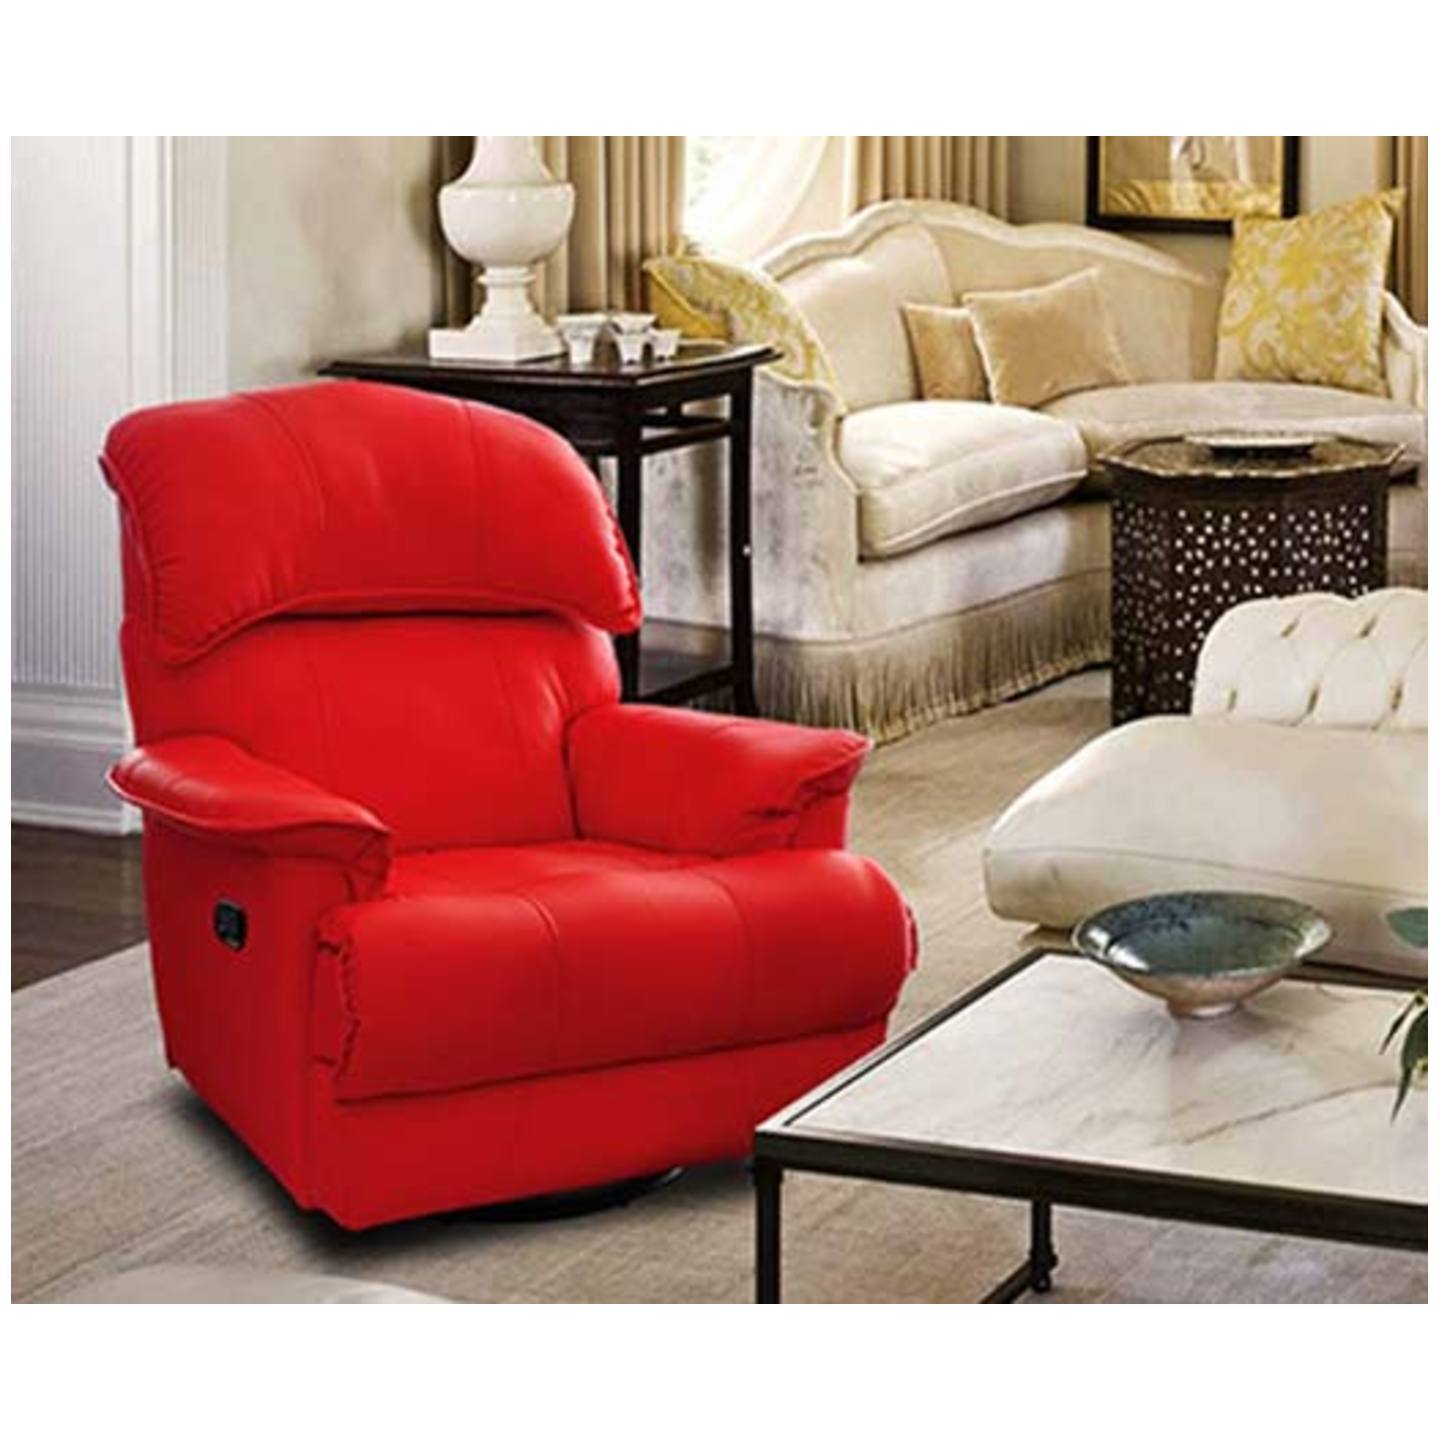 LN Recliner Chair Livo Electronic System In Red Colour